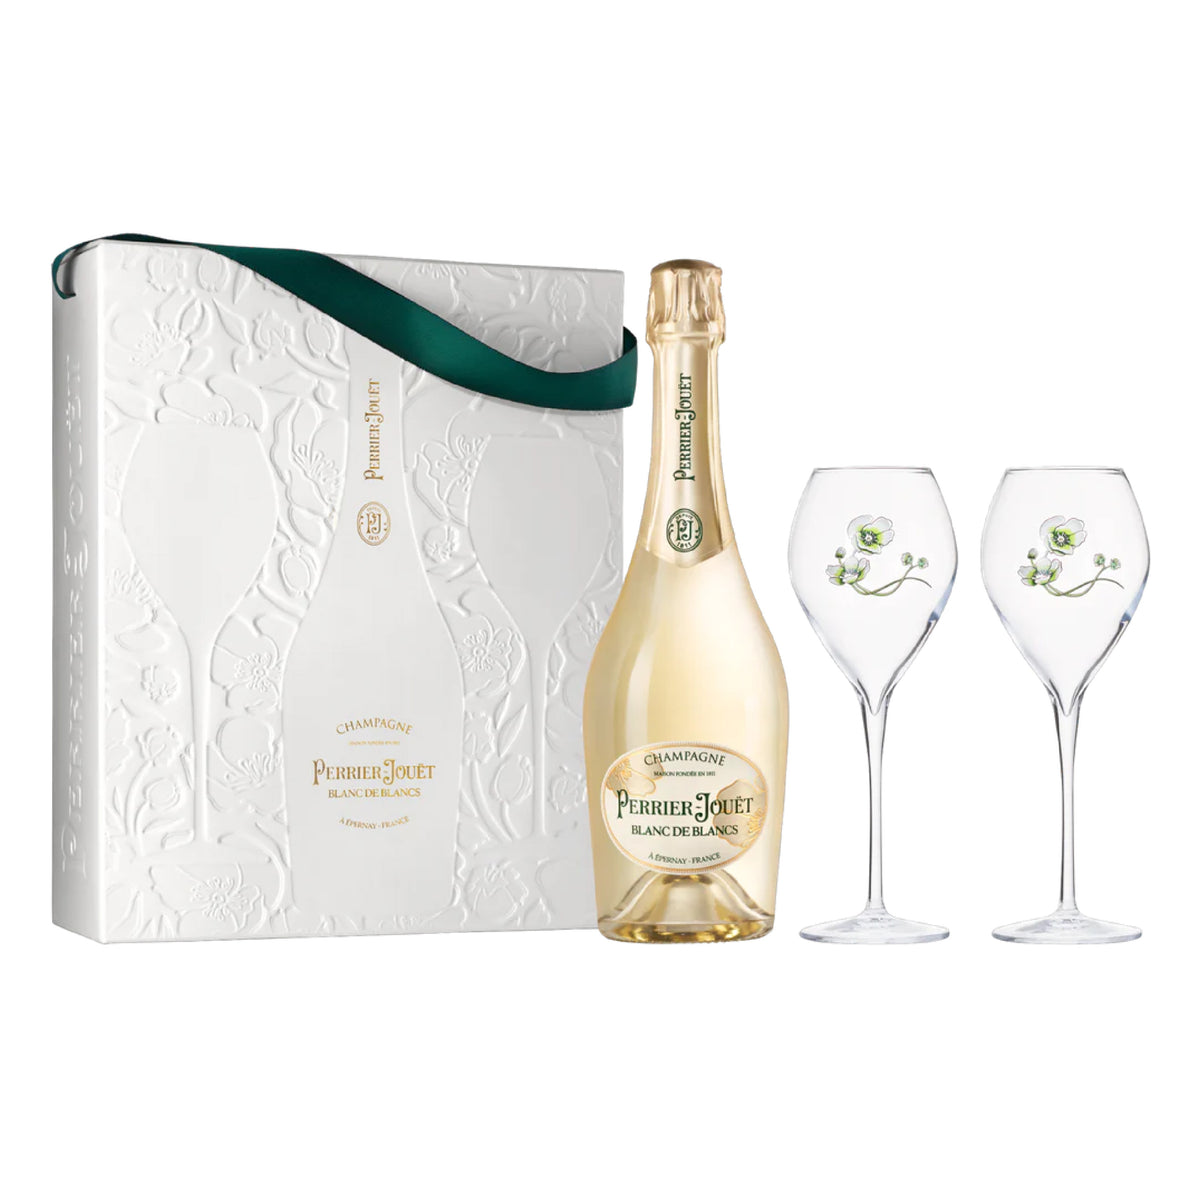 PERRIER JOUET Champagne Brut Blanc de Blancs NV with 2 glasses in Ecobox Gift Set